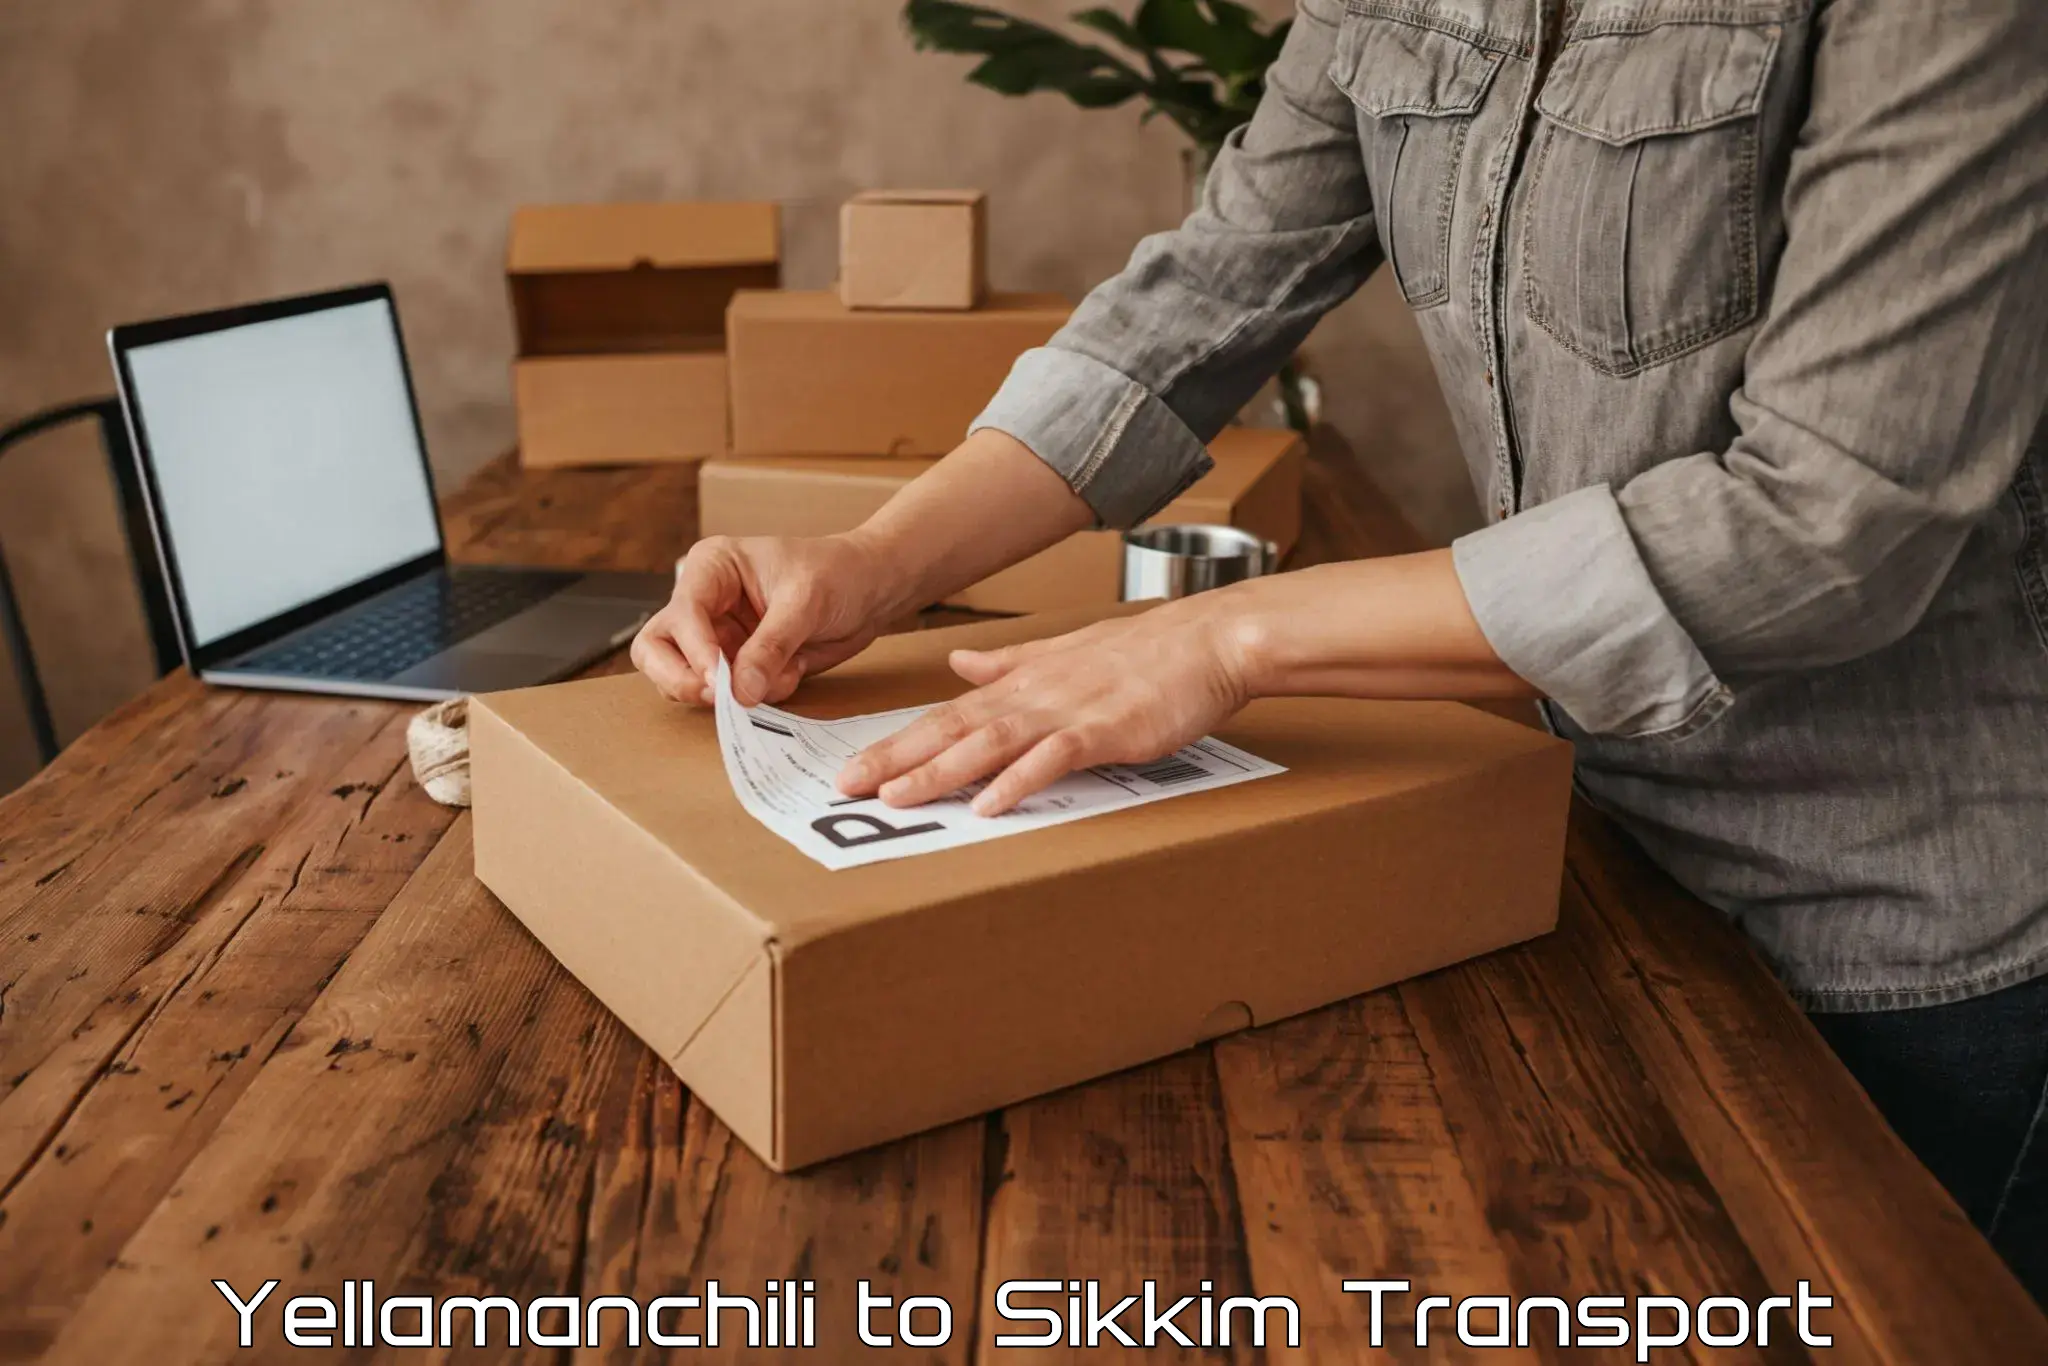 Road transport online services Yellamanchili to Pelling